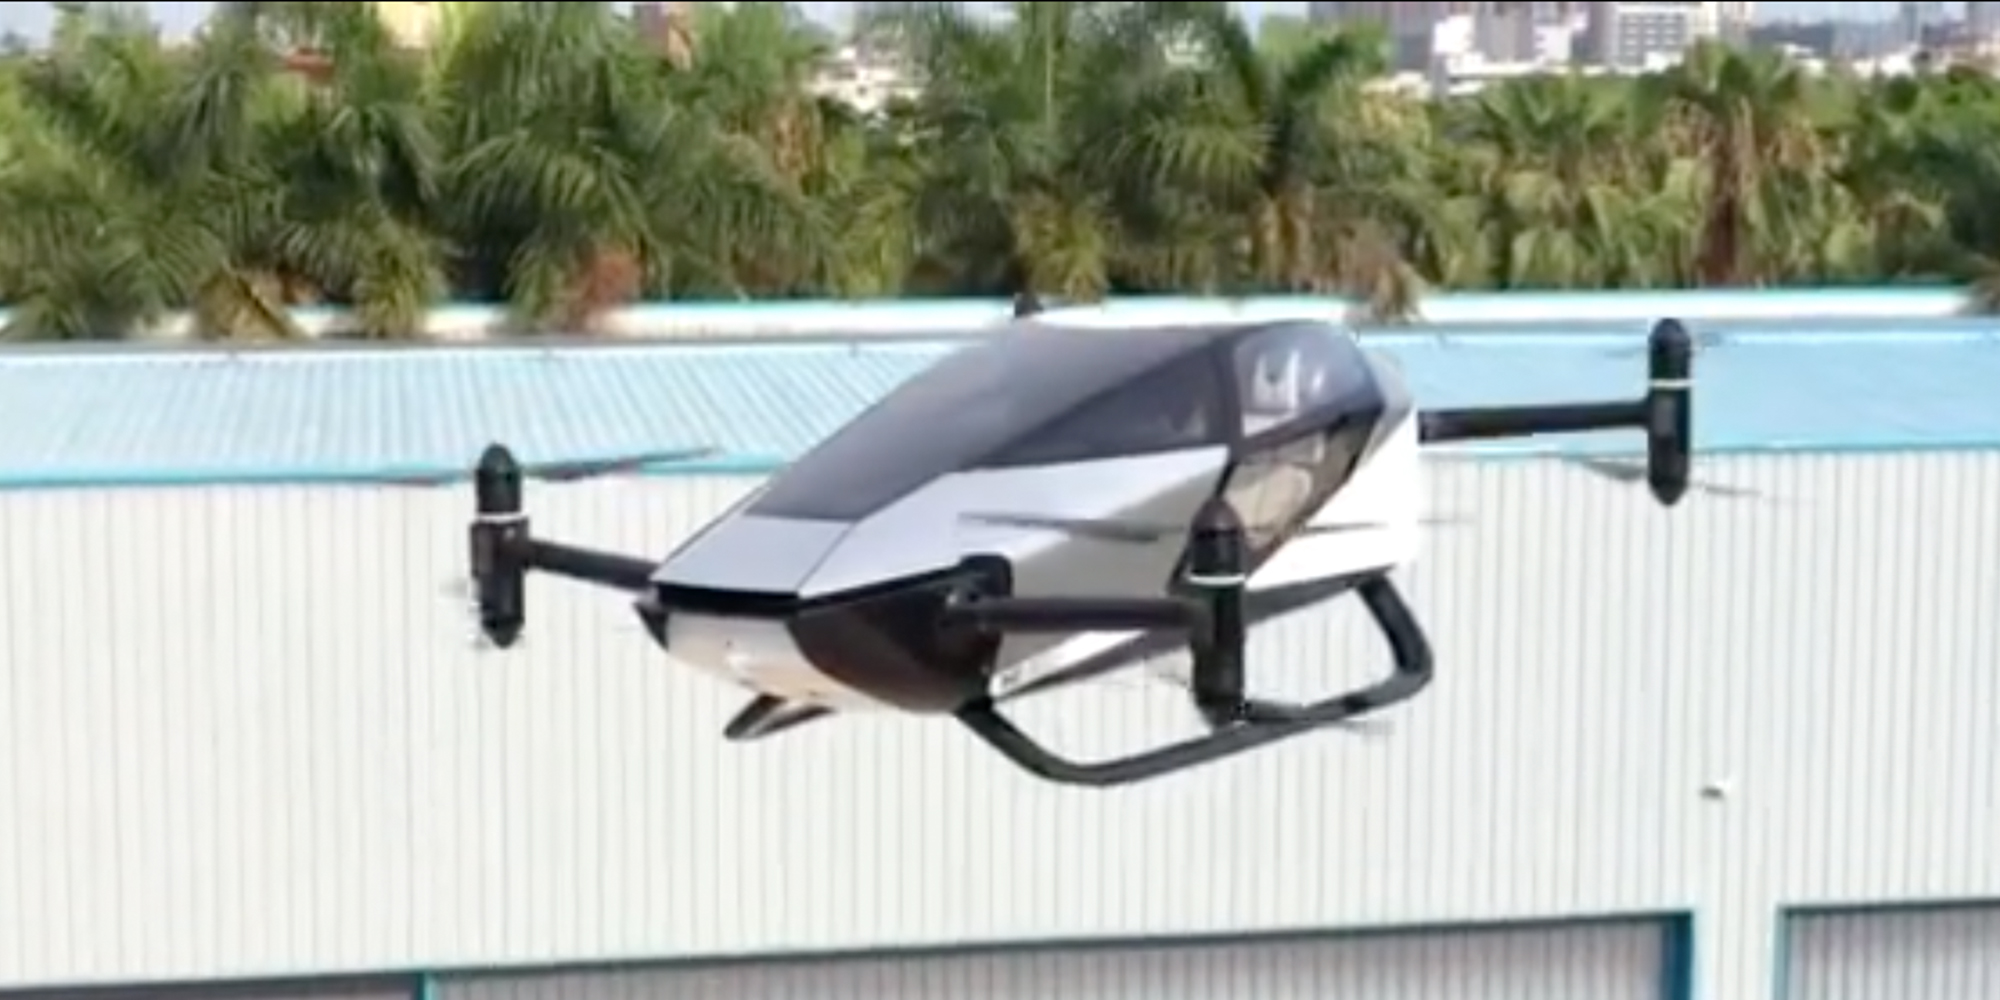 XPeng shares footage of its X2 electric flying car Electrek